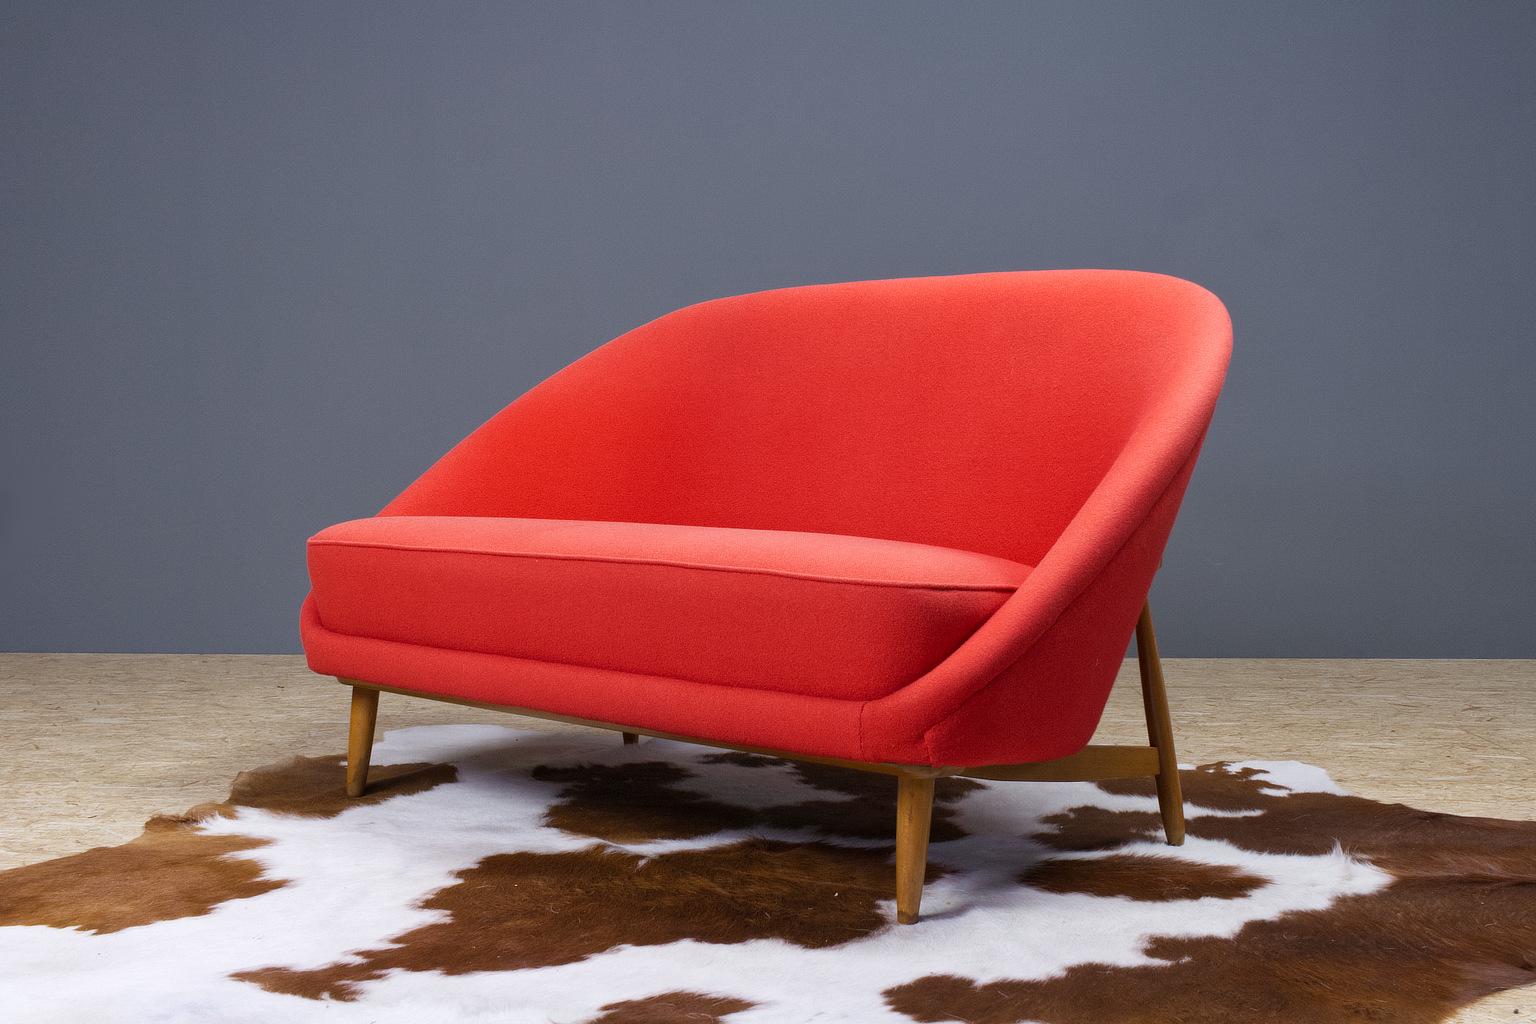 Theo Ruth sofa in red (model 115), for Artifort, The Netherlands. The back tilts slightly backward and has the recognisable natural flow and comfort of Ruth's design. This two-seat or love seat, has a great seating comfort. Item is marked with an